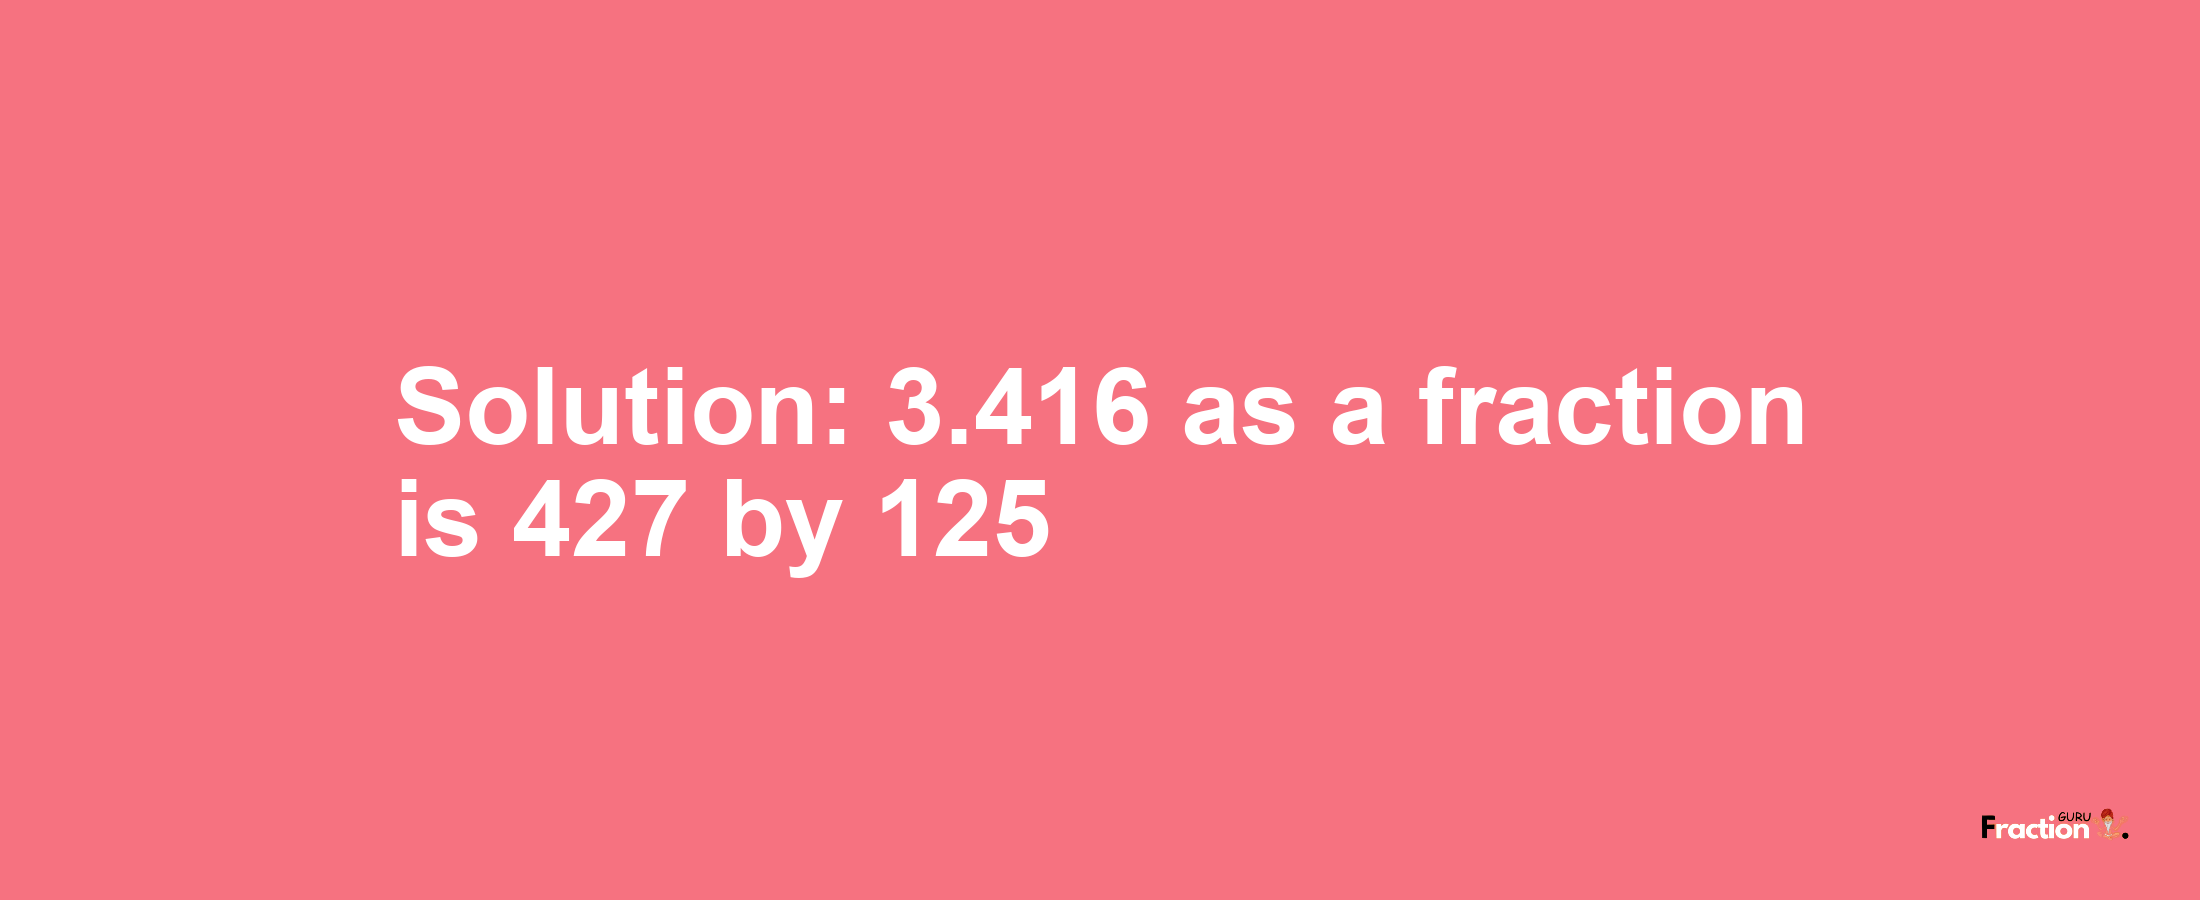 Solution:3.416 as a fraction is 427/125